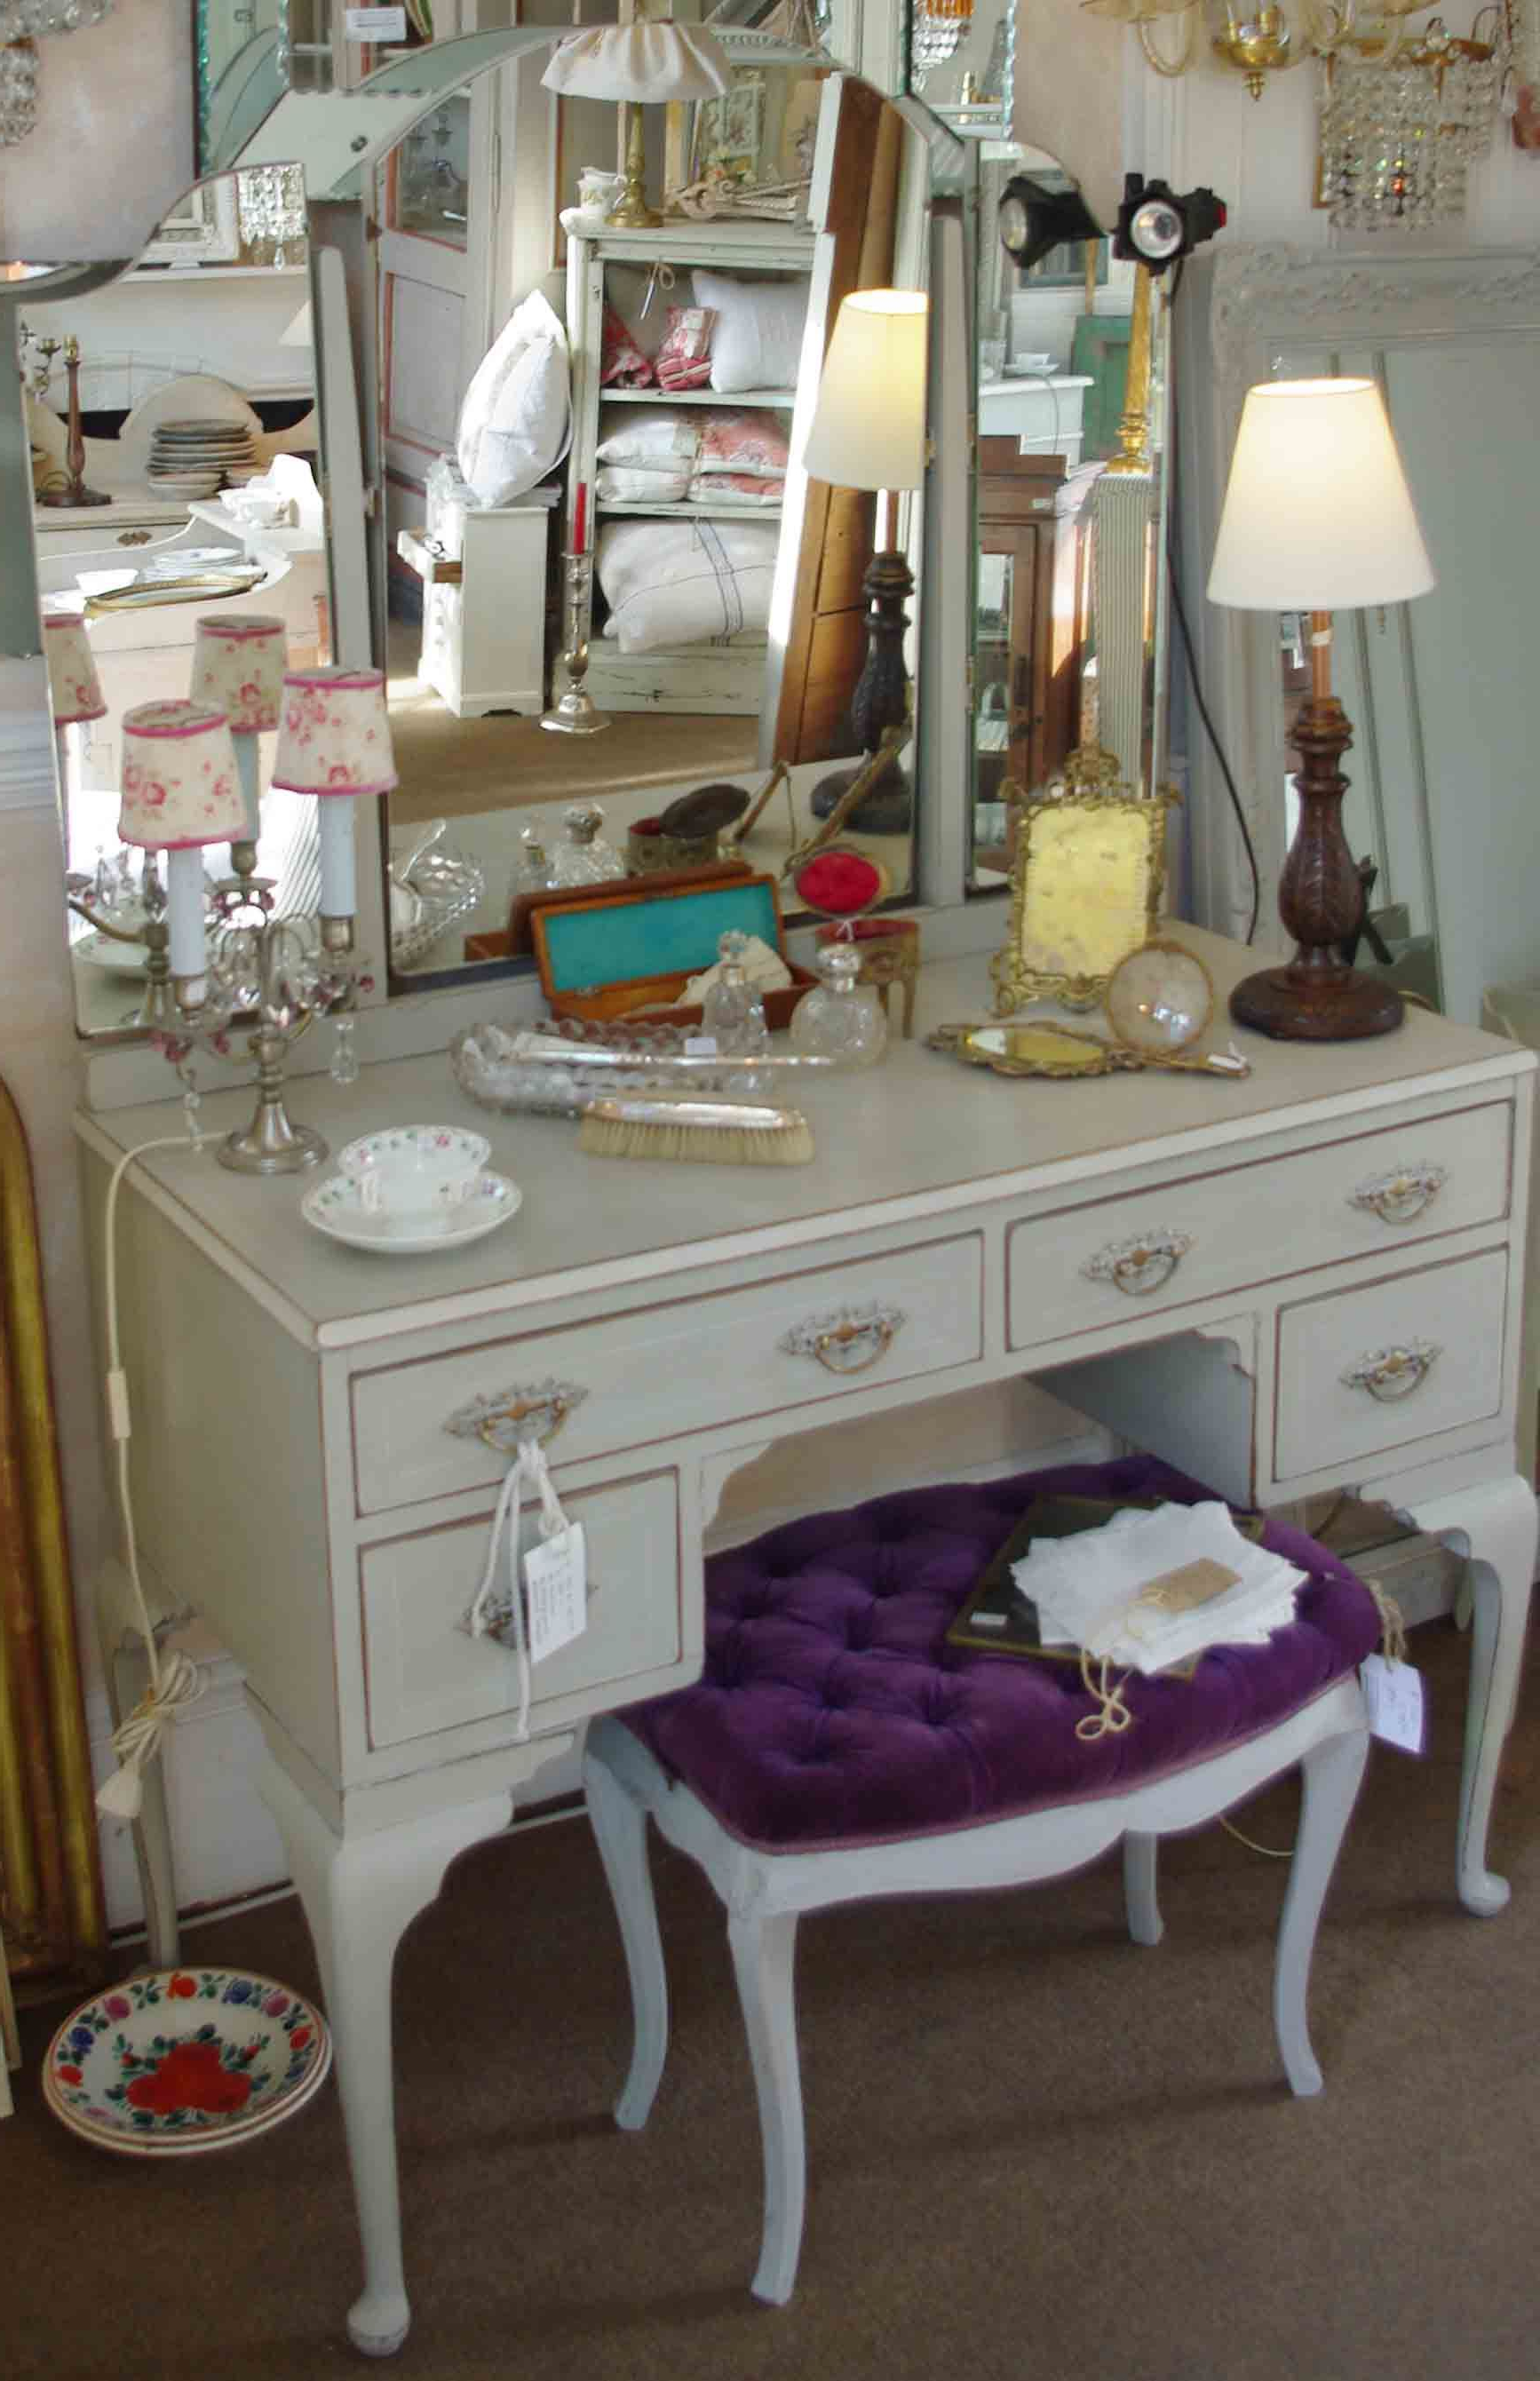 Furniture Inspiration With Vanity Table For Your Best Plans Purple Vanity Stool And Vintage